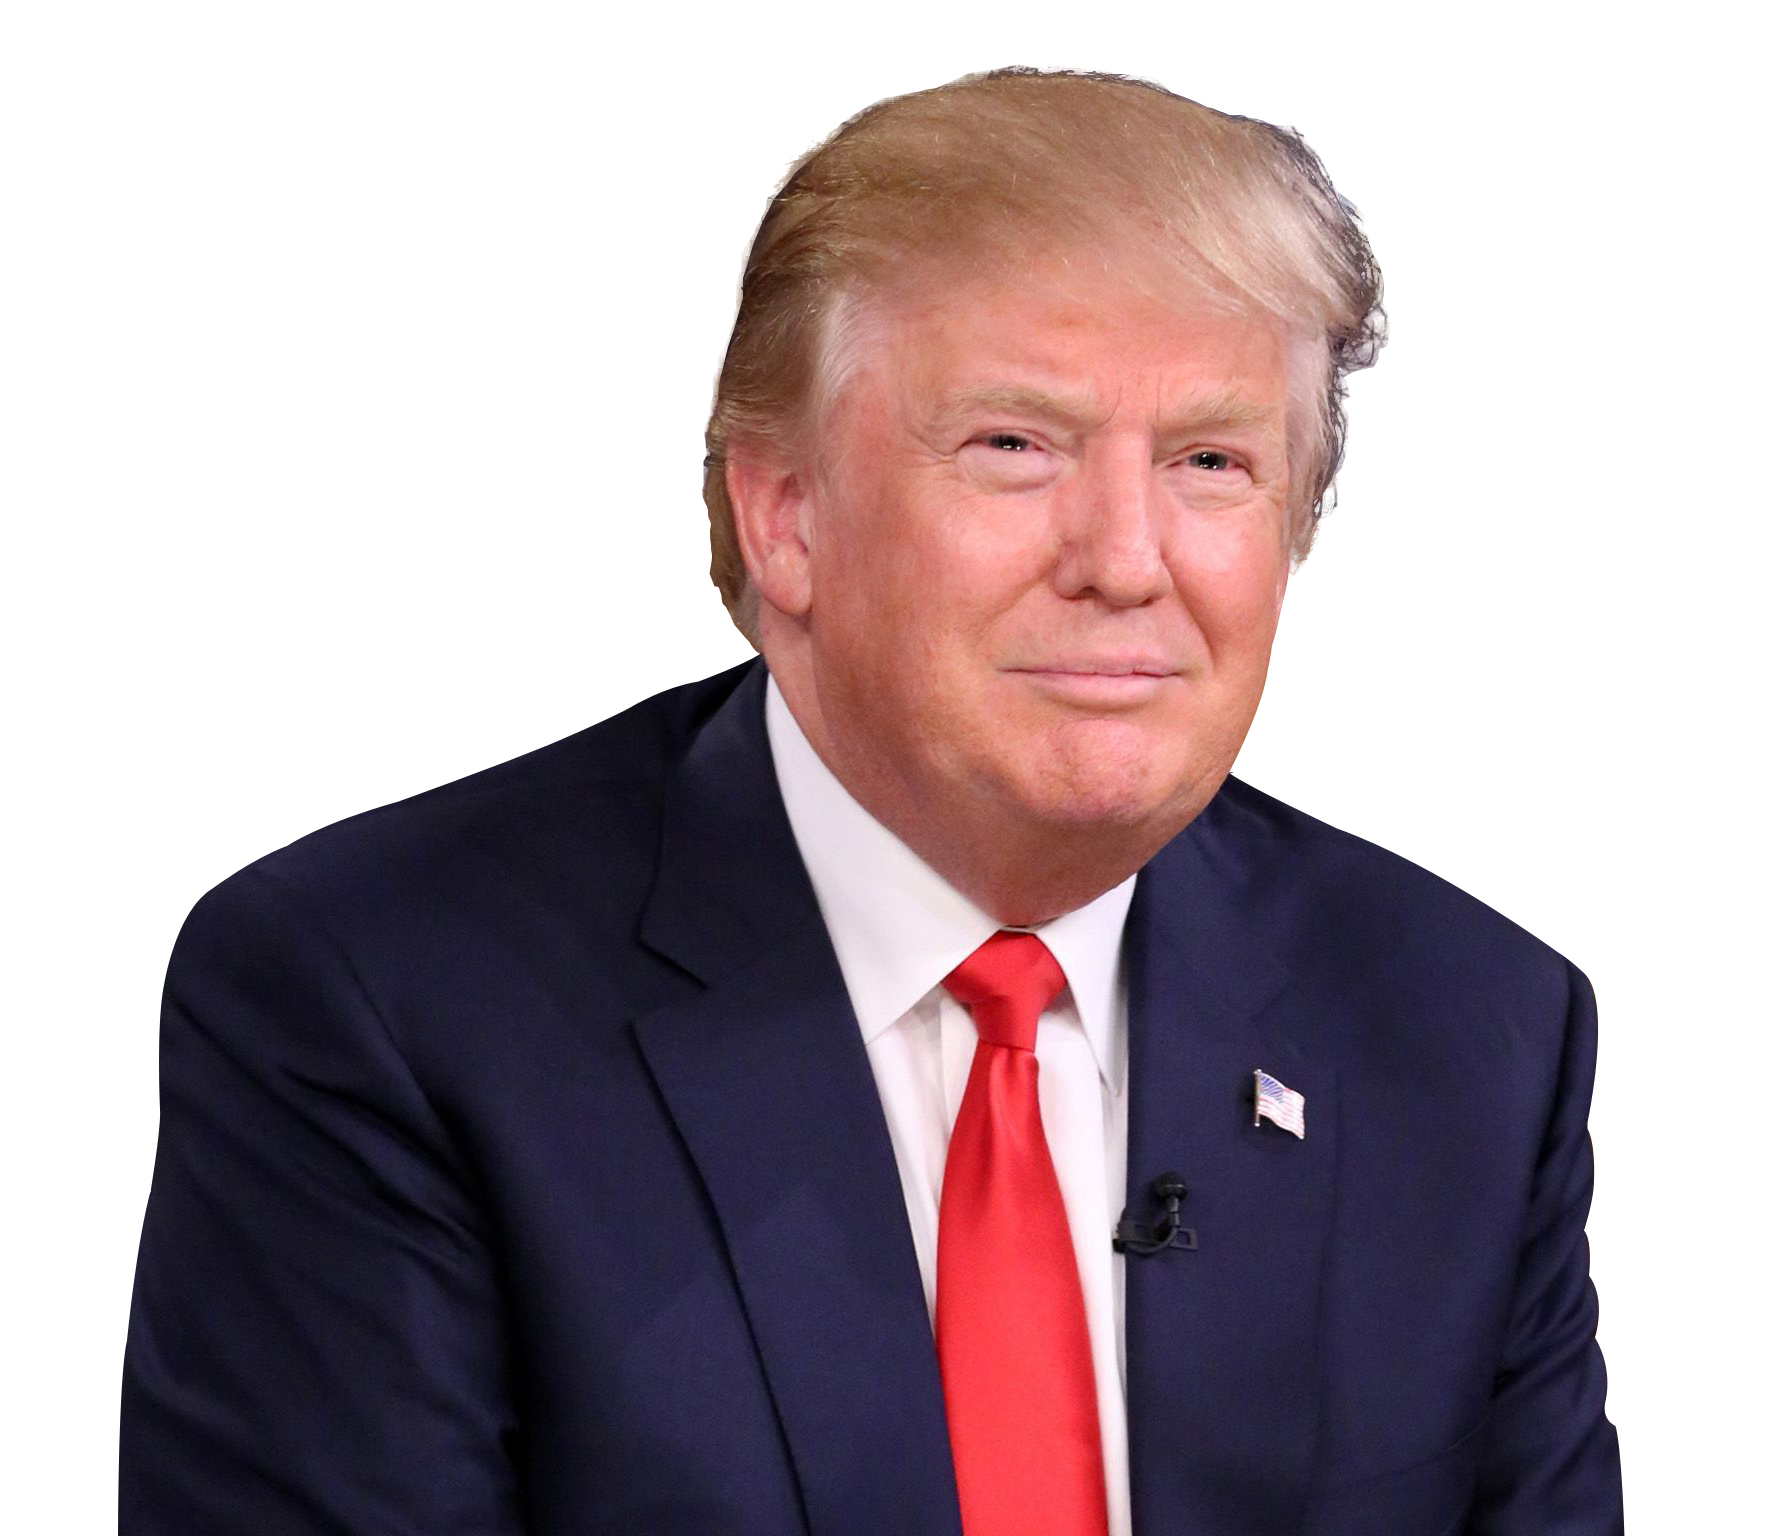 Donald Trump PNG Image Background